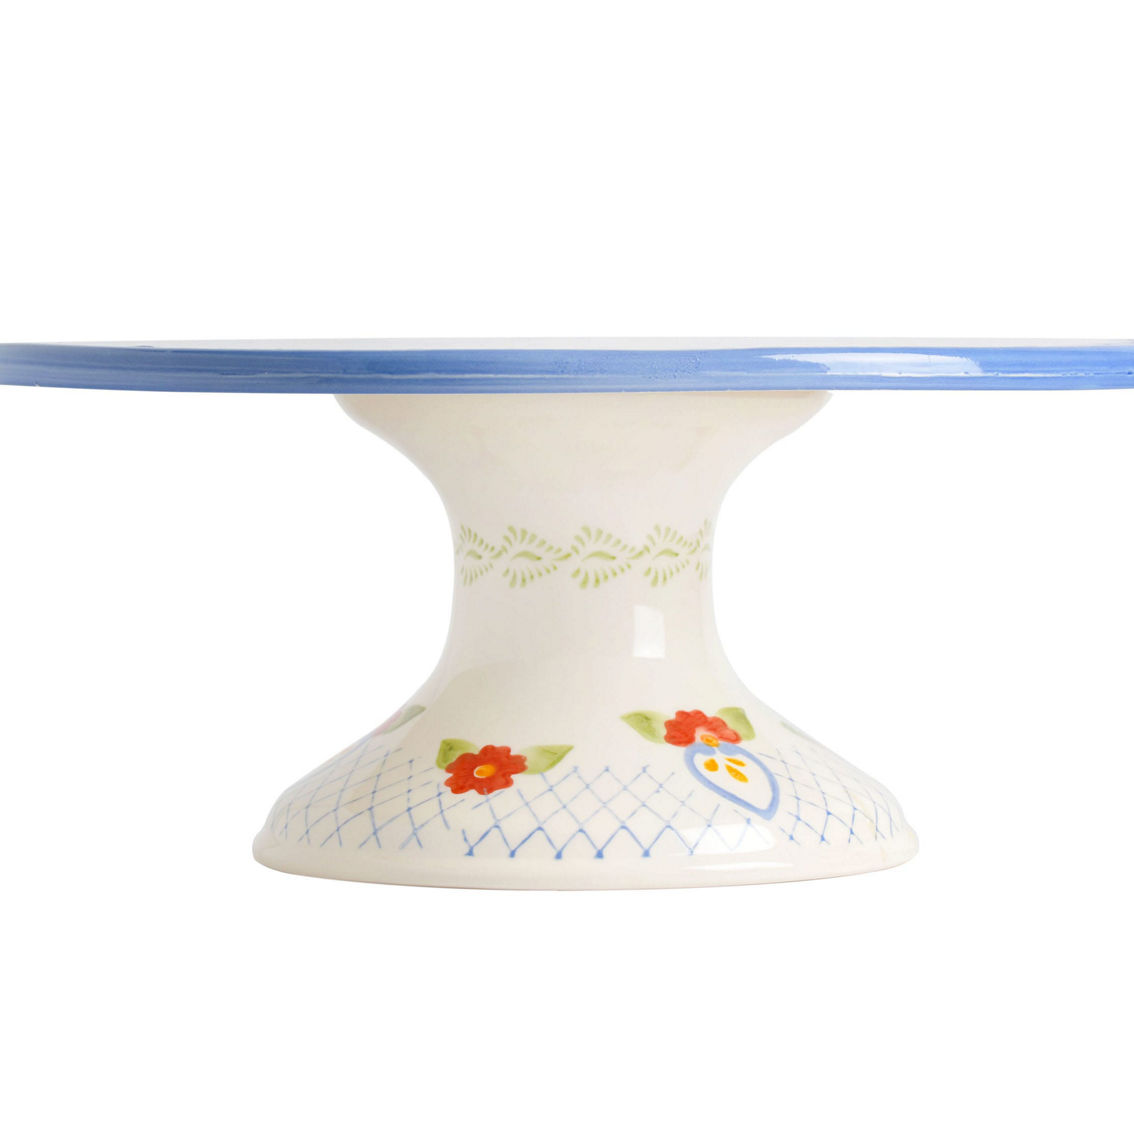 Laurie Gates California Designs Stoneware 12 Inch Cake Stand in Multi - Image 3 of 5